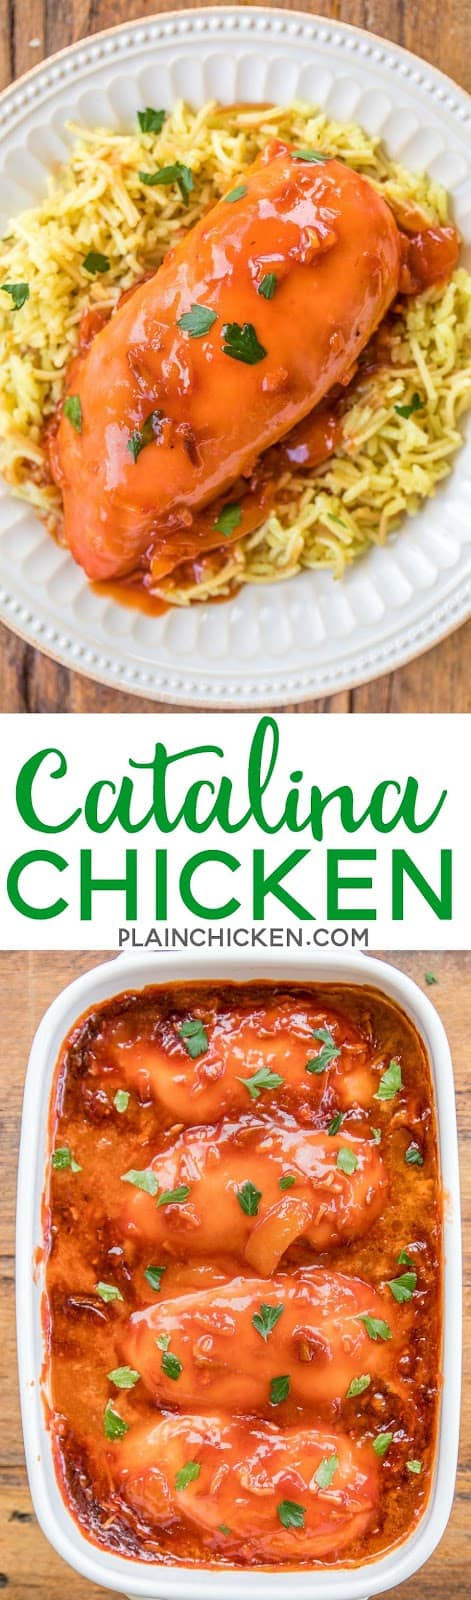 Catalina Chicken - only 4 ingredients!! No prep work! Just toss together and bake. SO easy!! Everyone LOVED this easy weeknight chicken dish. Easy to double the recipe for a crowd. Serve with rice, potatoes or noodles. A real crowd pleaser!